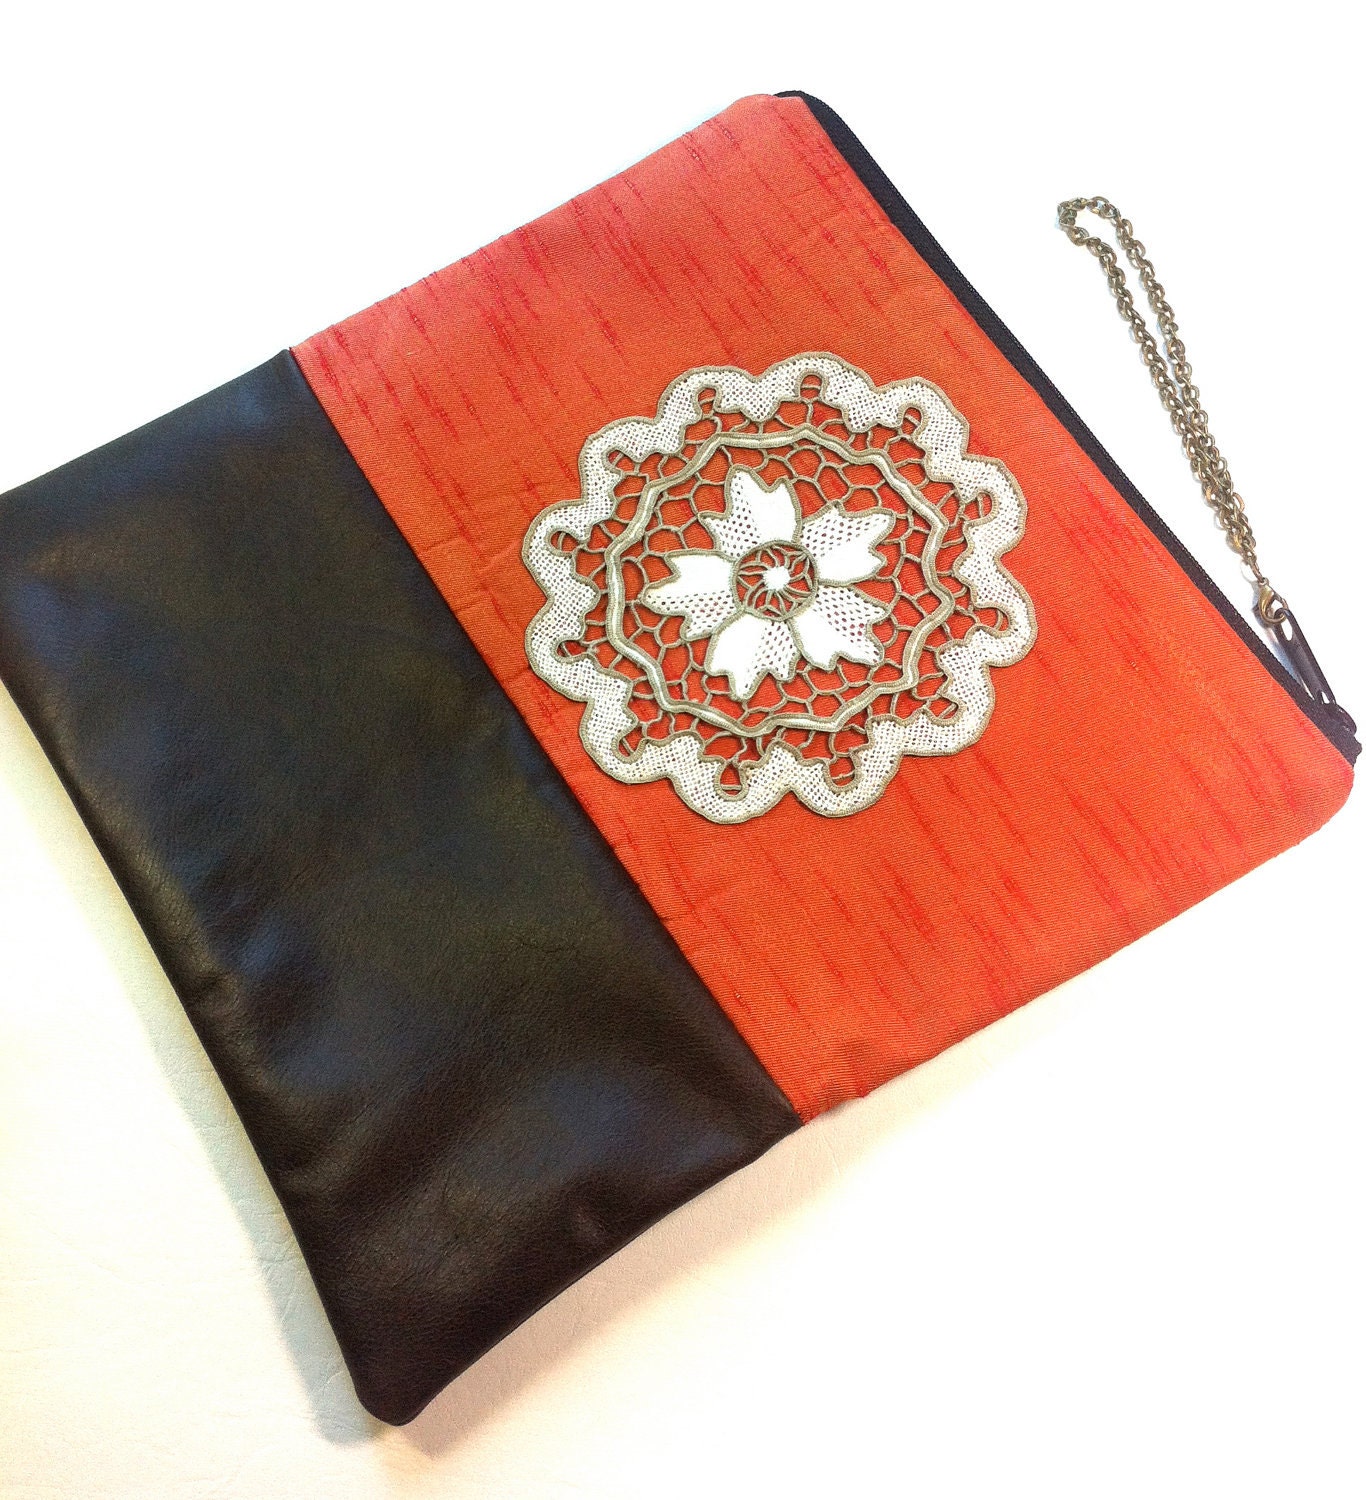 Recycled Leather and Reclaimed Fabric Square Foldover Clutch,  Brown and Orange - hoshiidesigns